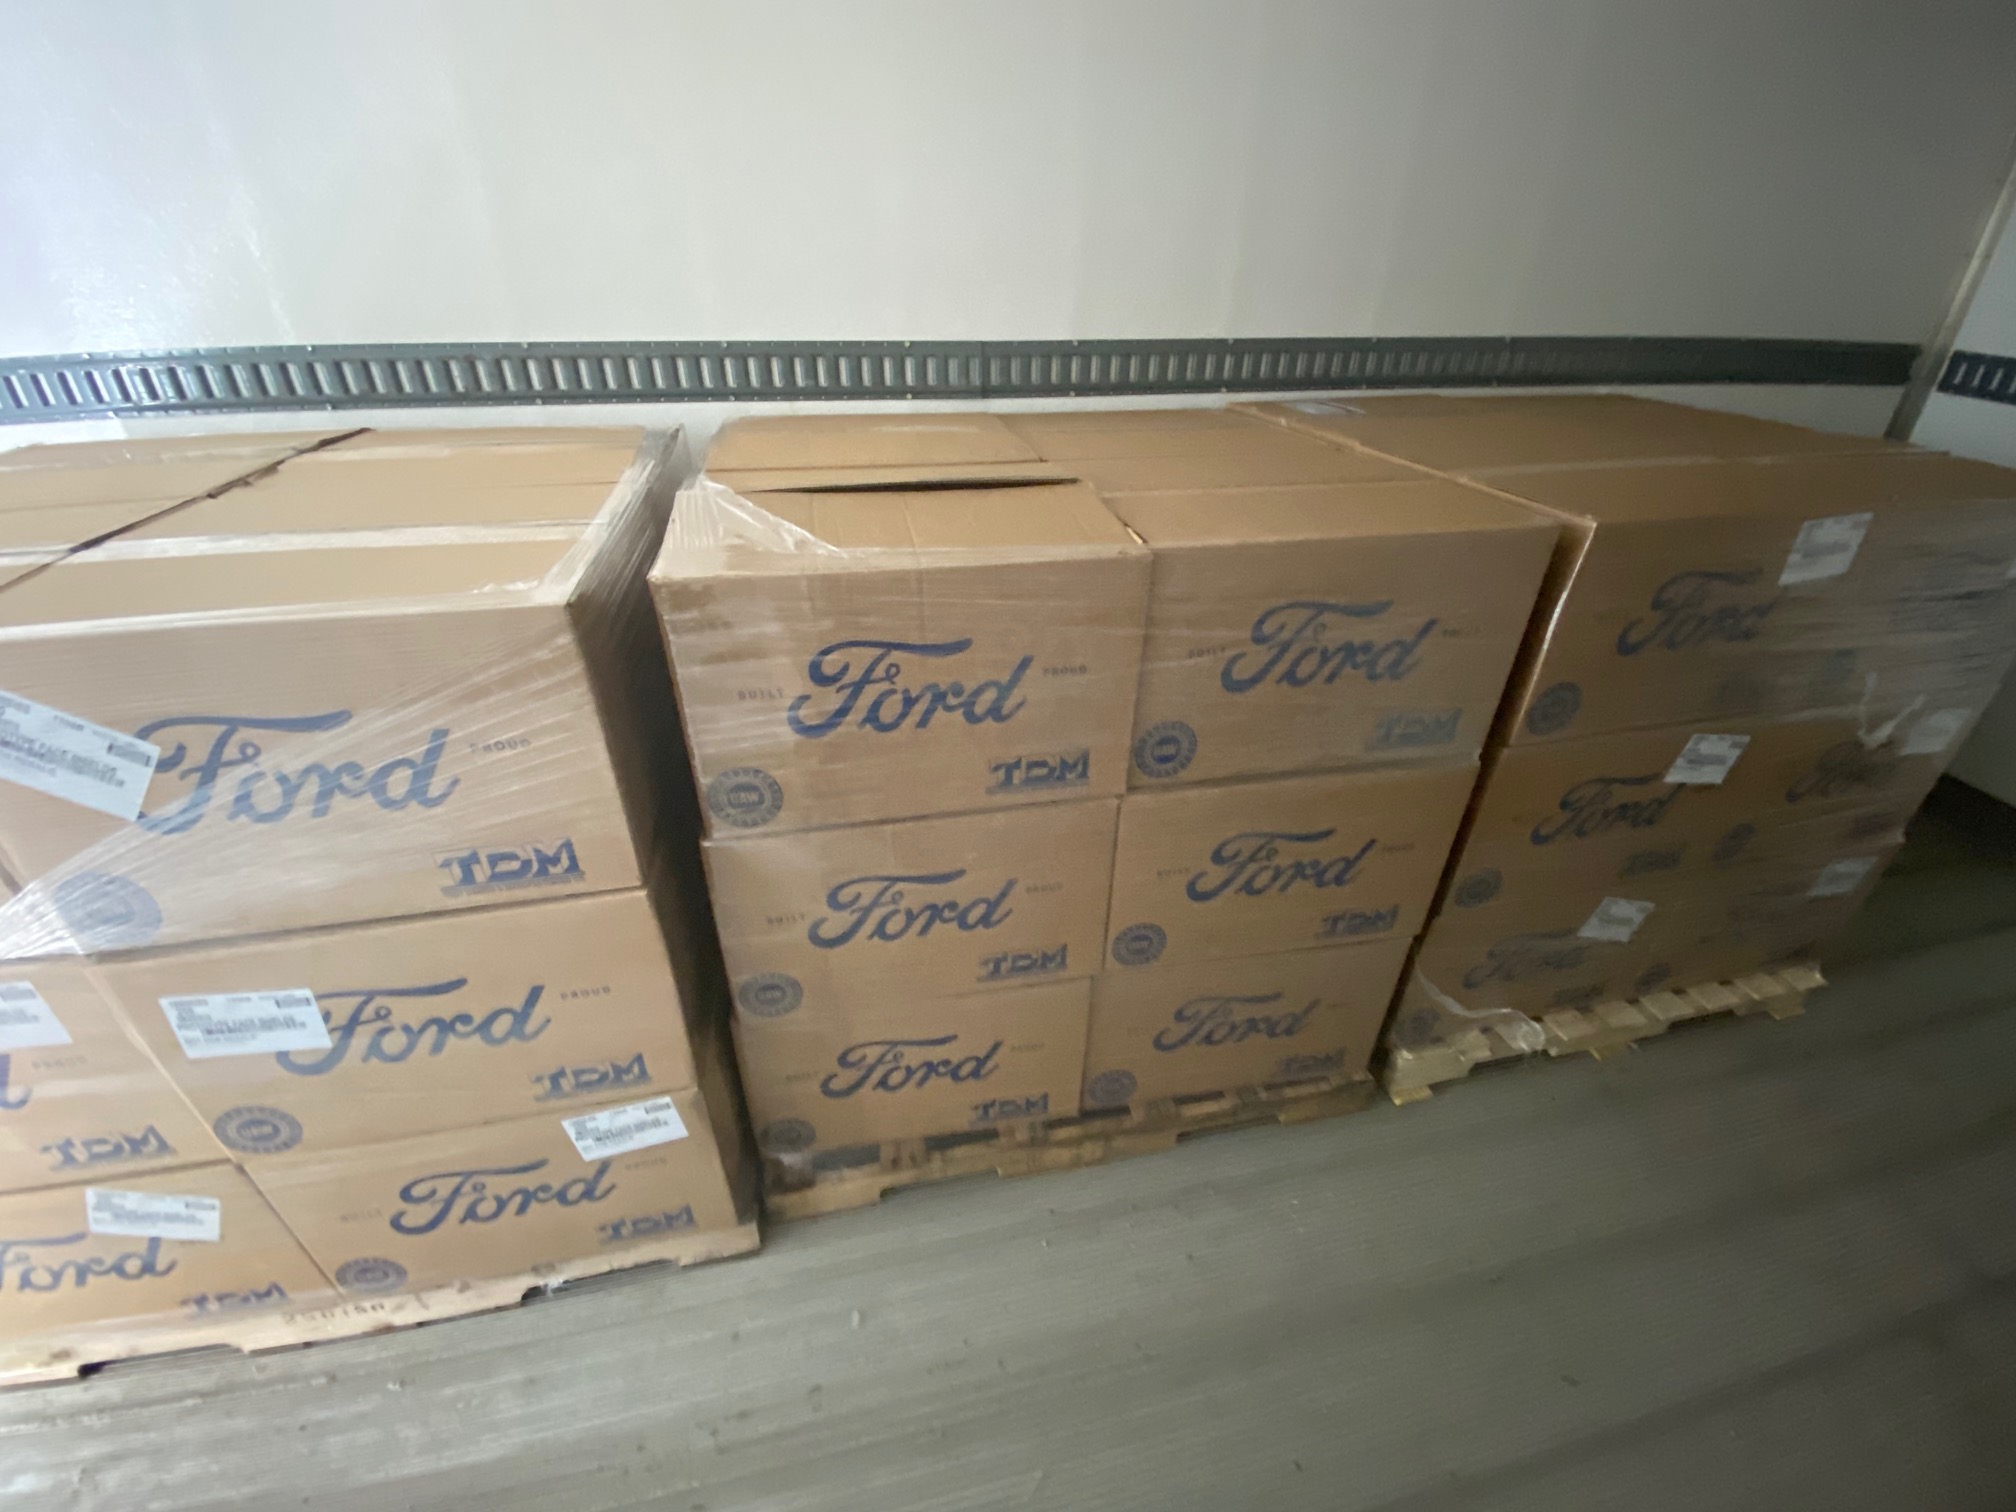 Shipments of Face Shields from Ford Motor Company Received at Monument Health with the Help of McKie Ford Lincoln